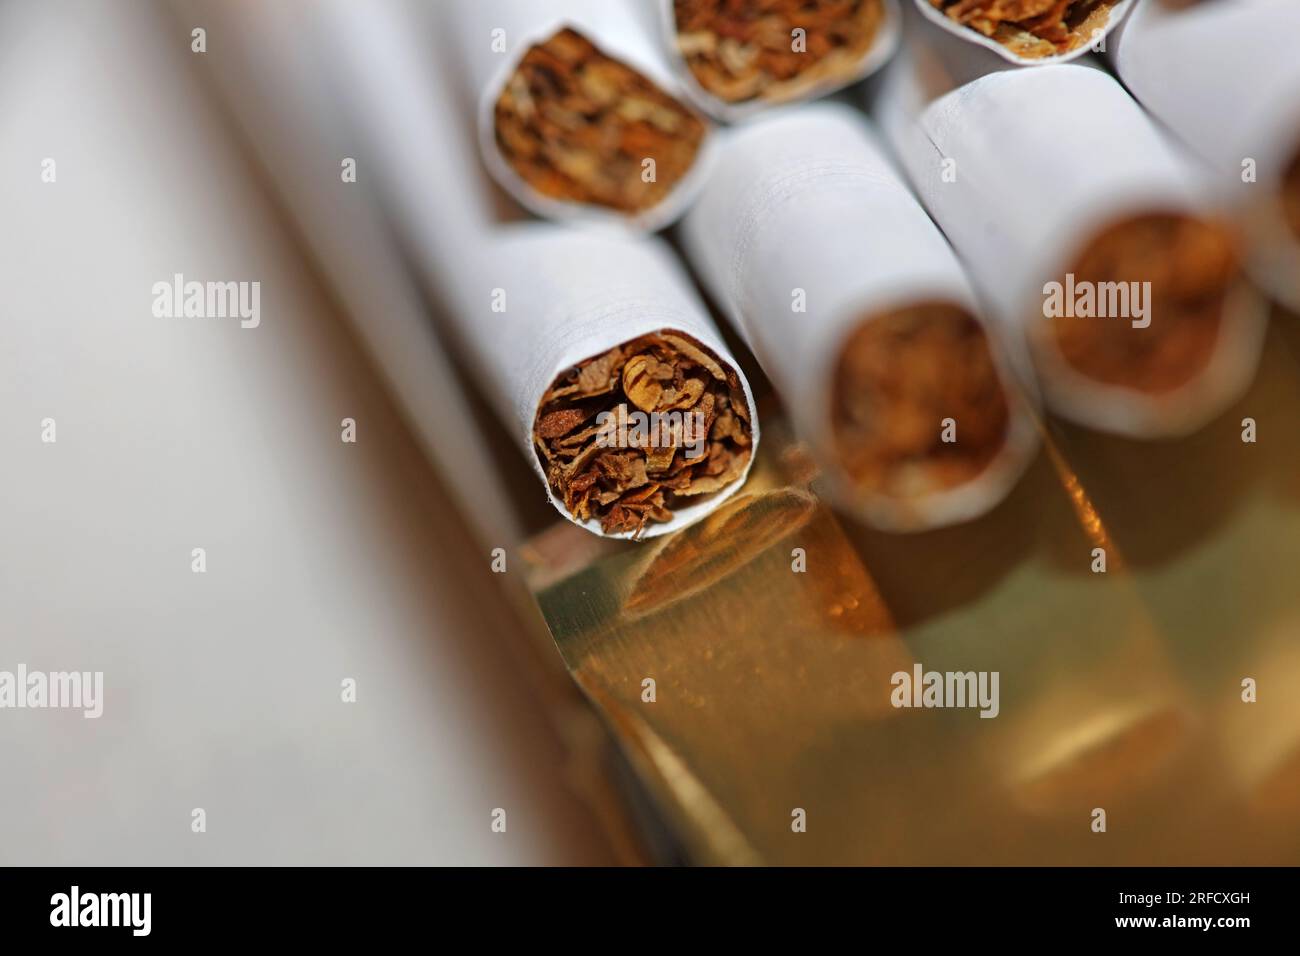 Many cigarettes in colorful background close up of a roll tobacco in paper with filter tube no smoking concept image of several commercially made ciga Stock Photo